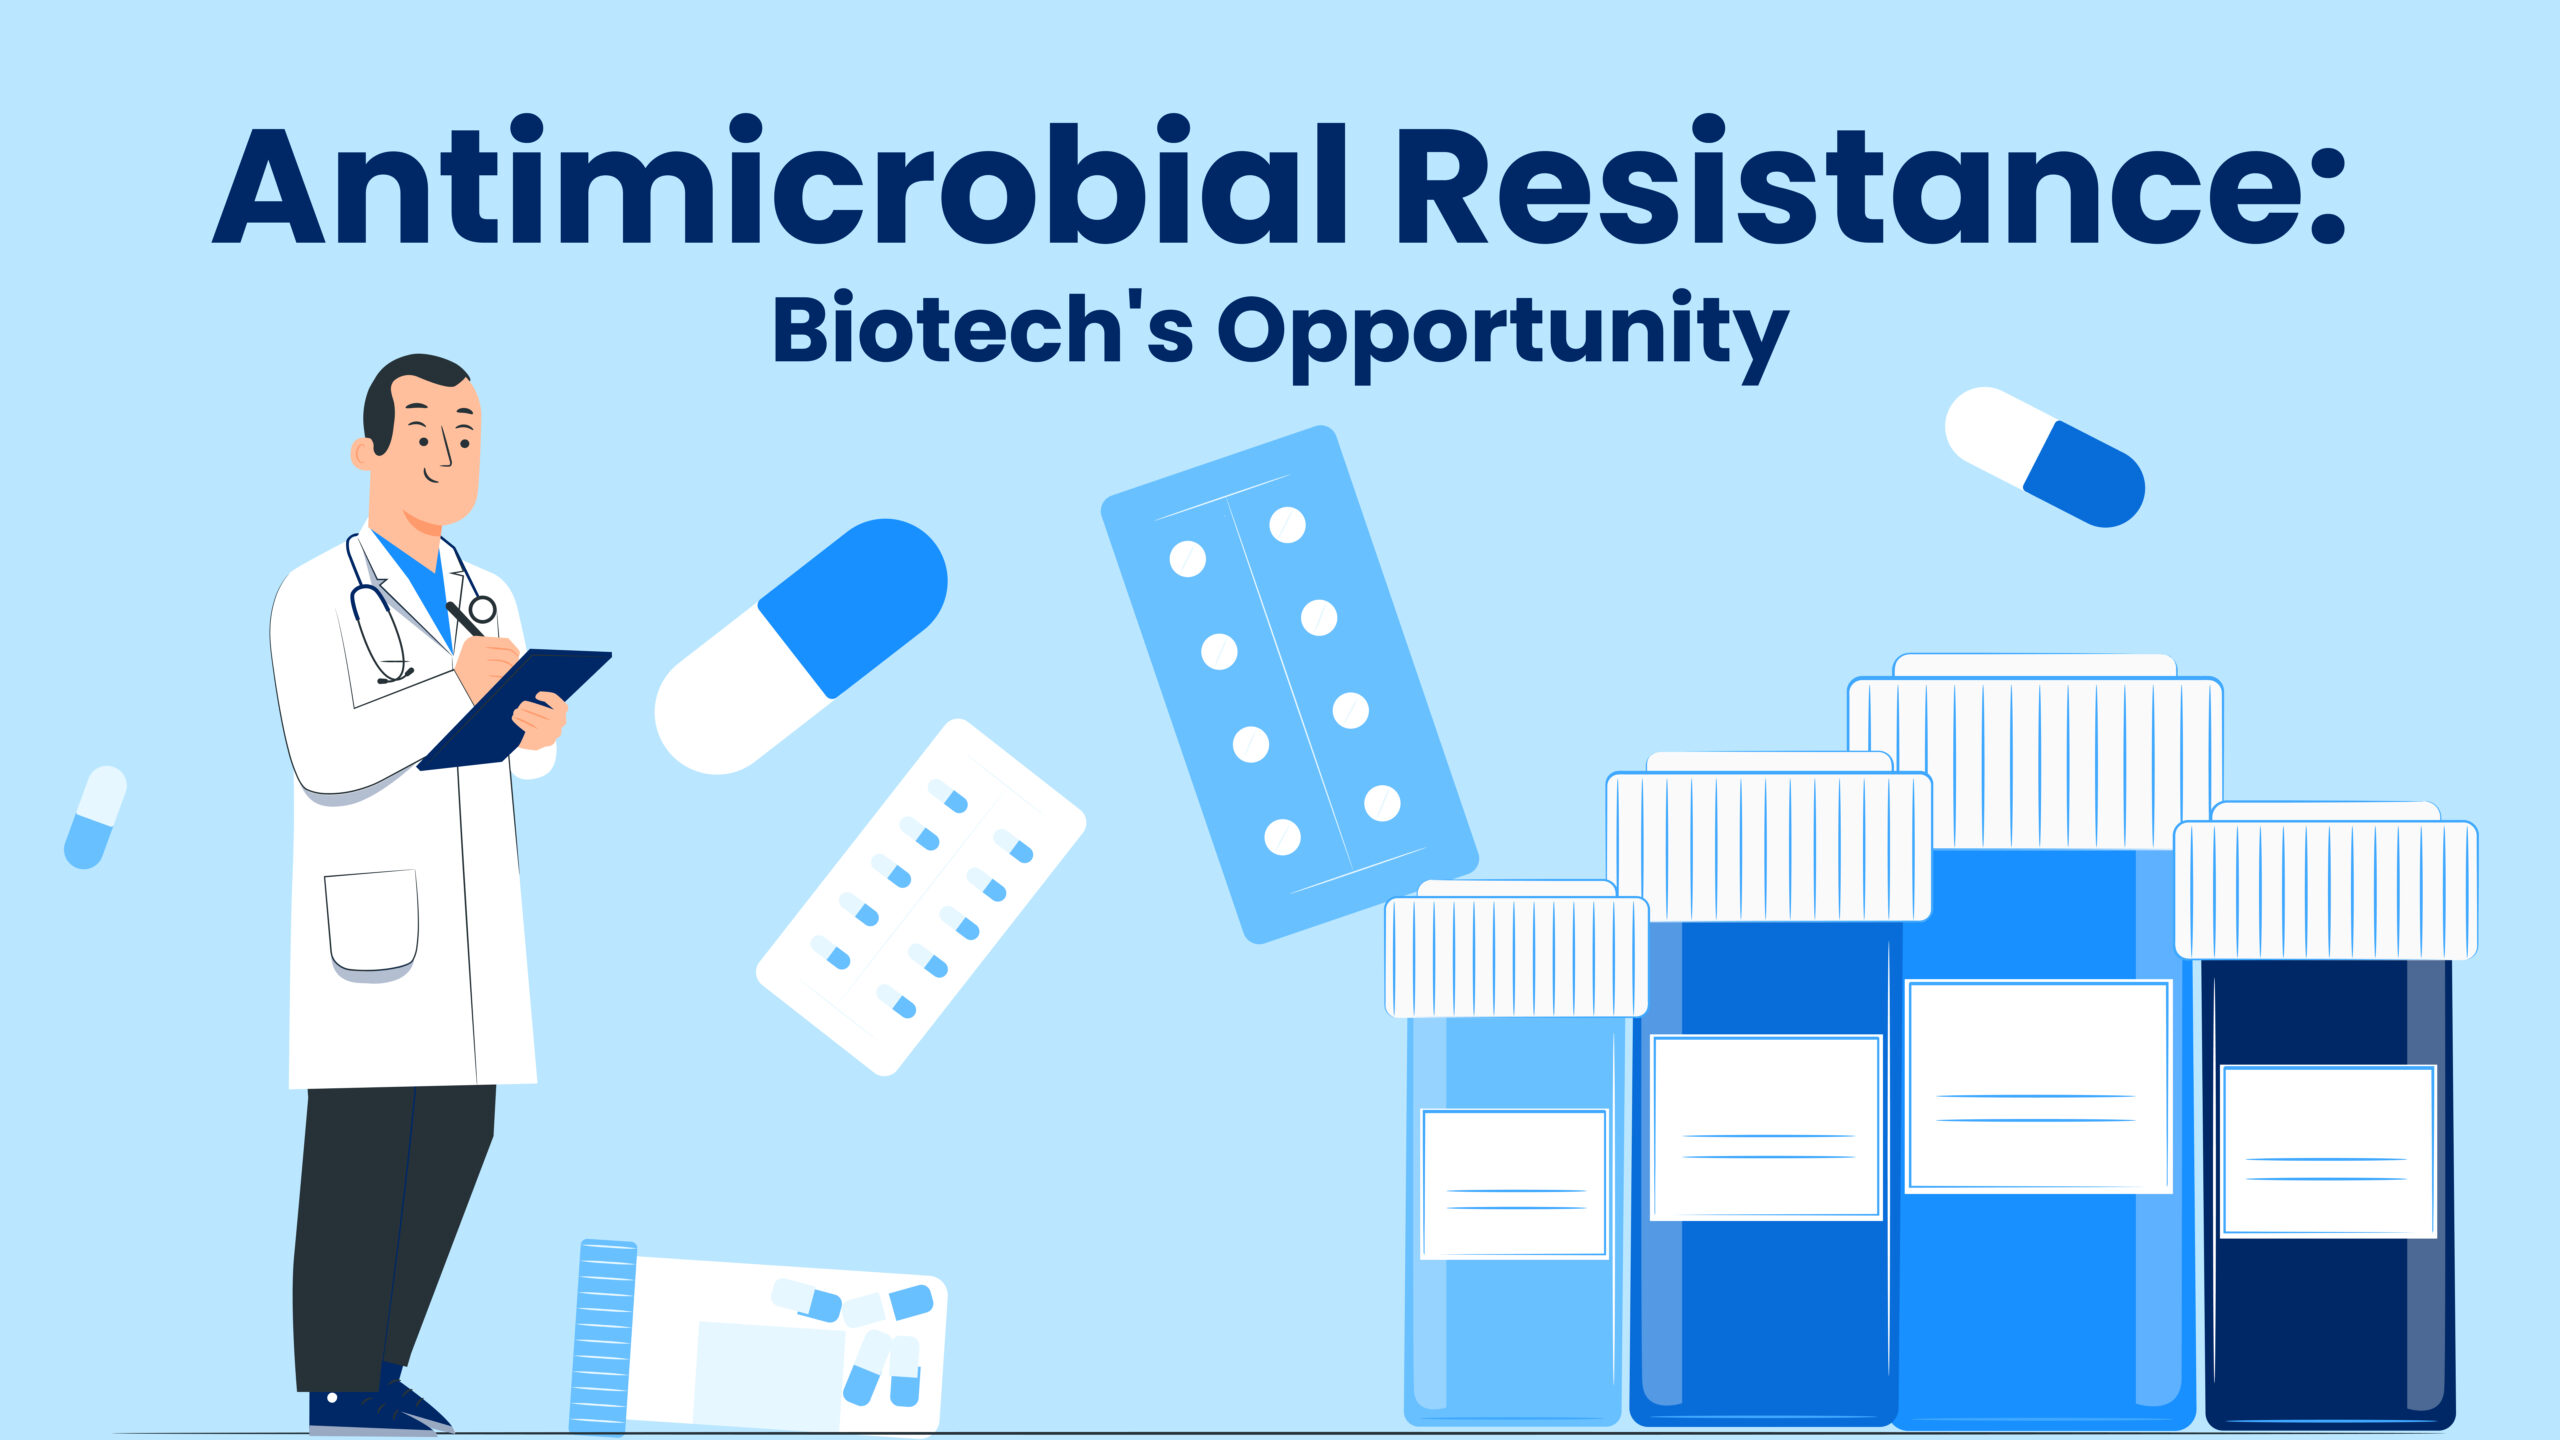 Why antimicrobial resistance is an opportunity for biotech